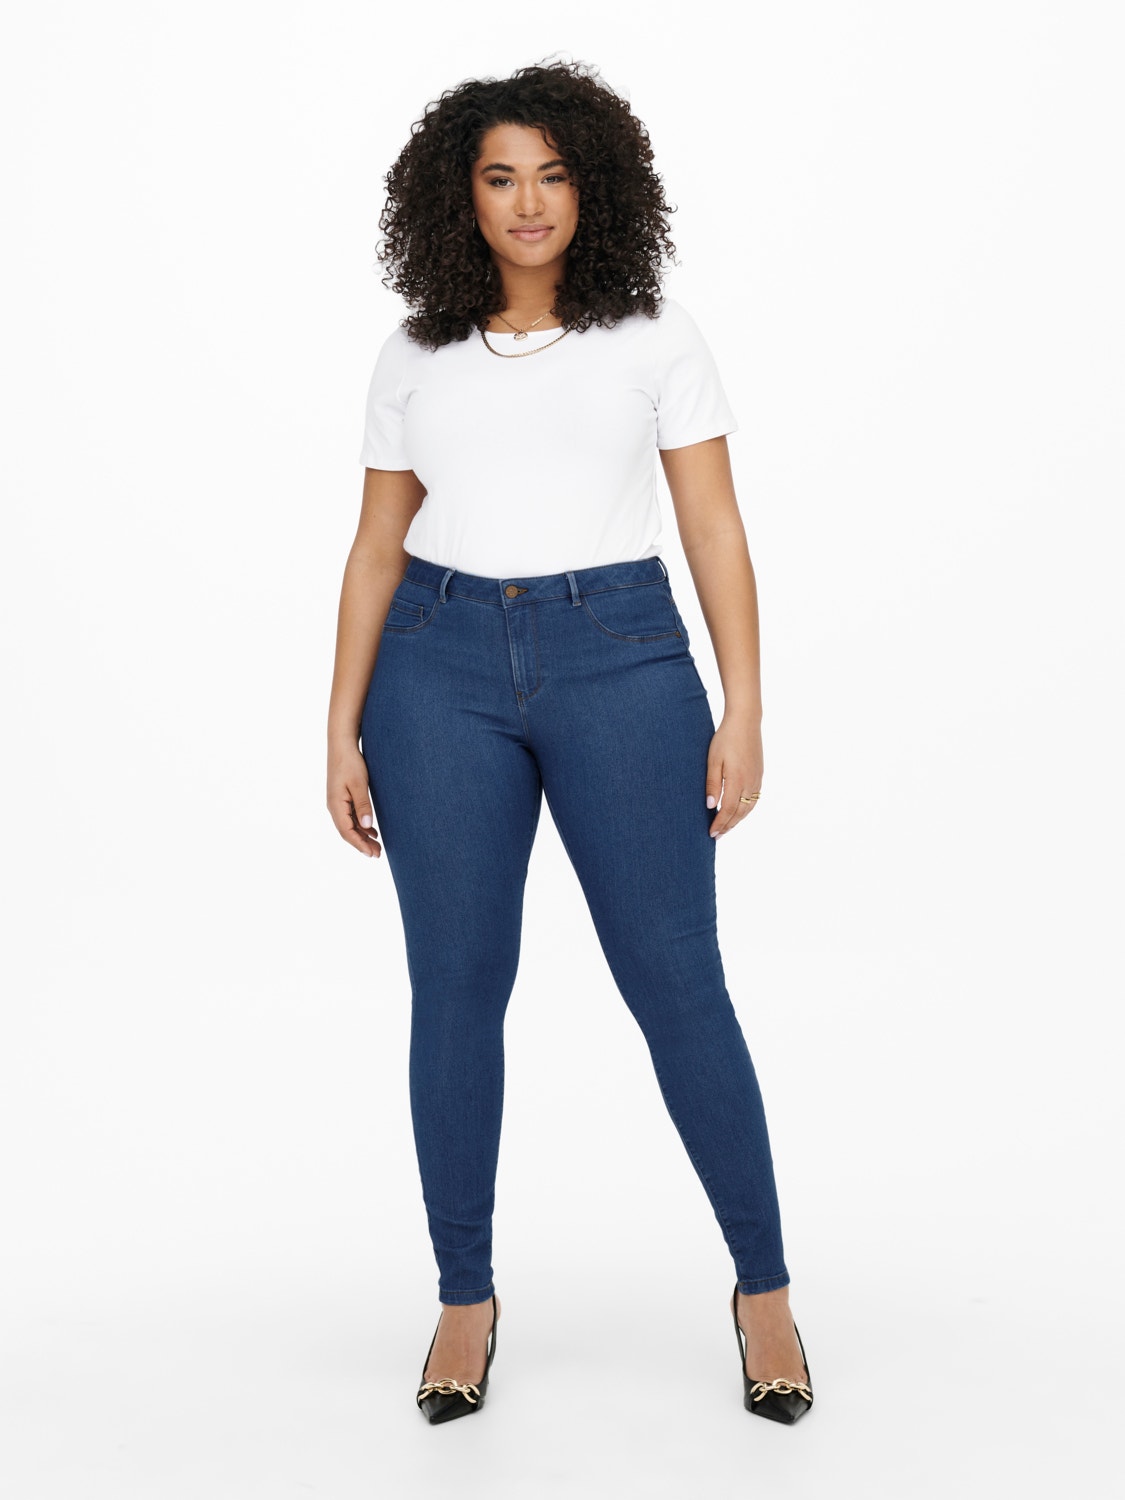 ONLY® jeans with discount! CARThunder fit push-up 20% | Skinny Curvy